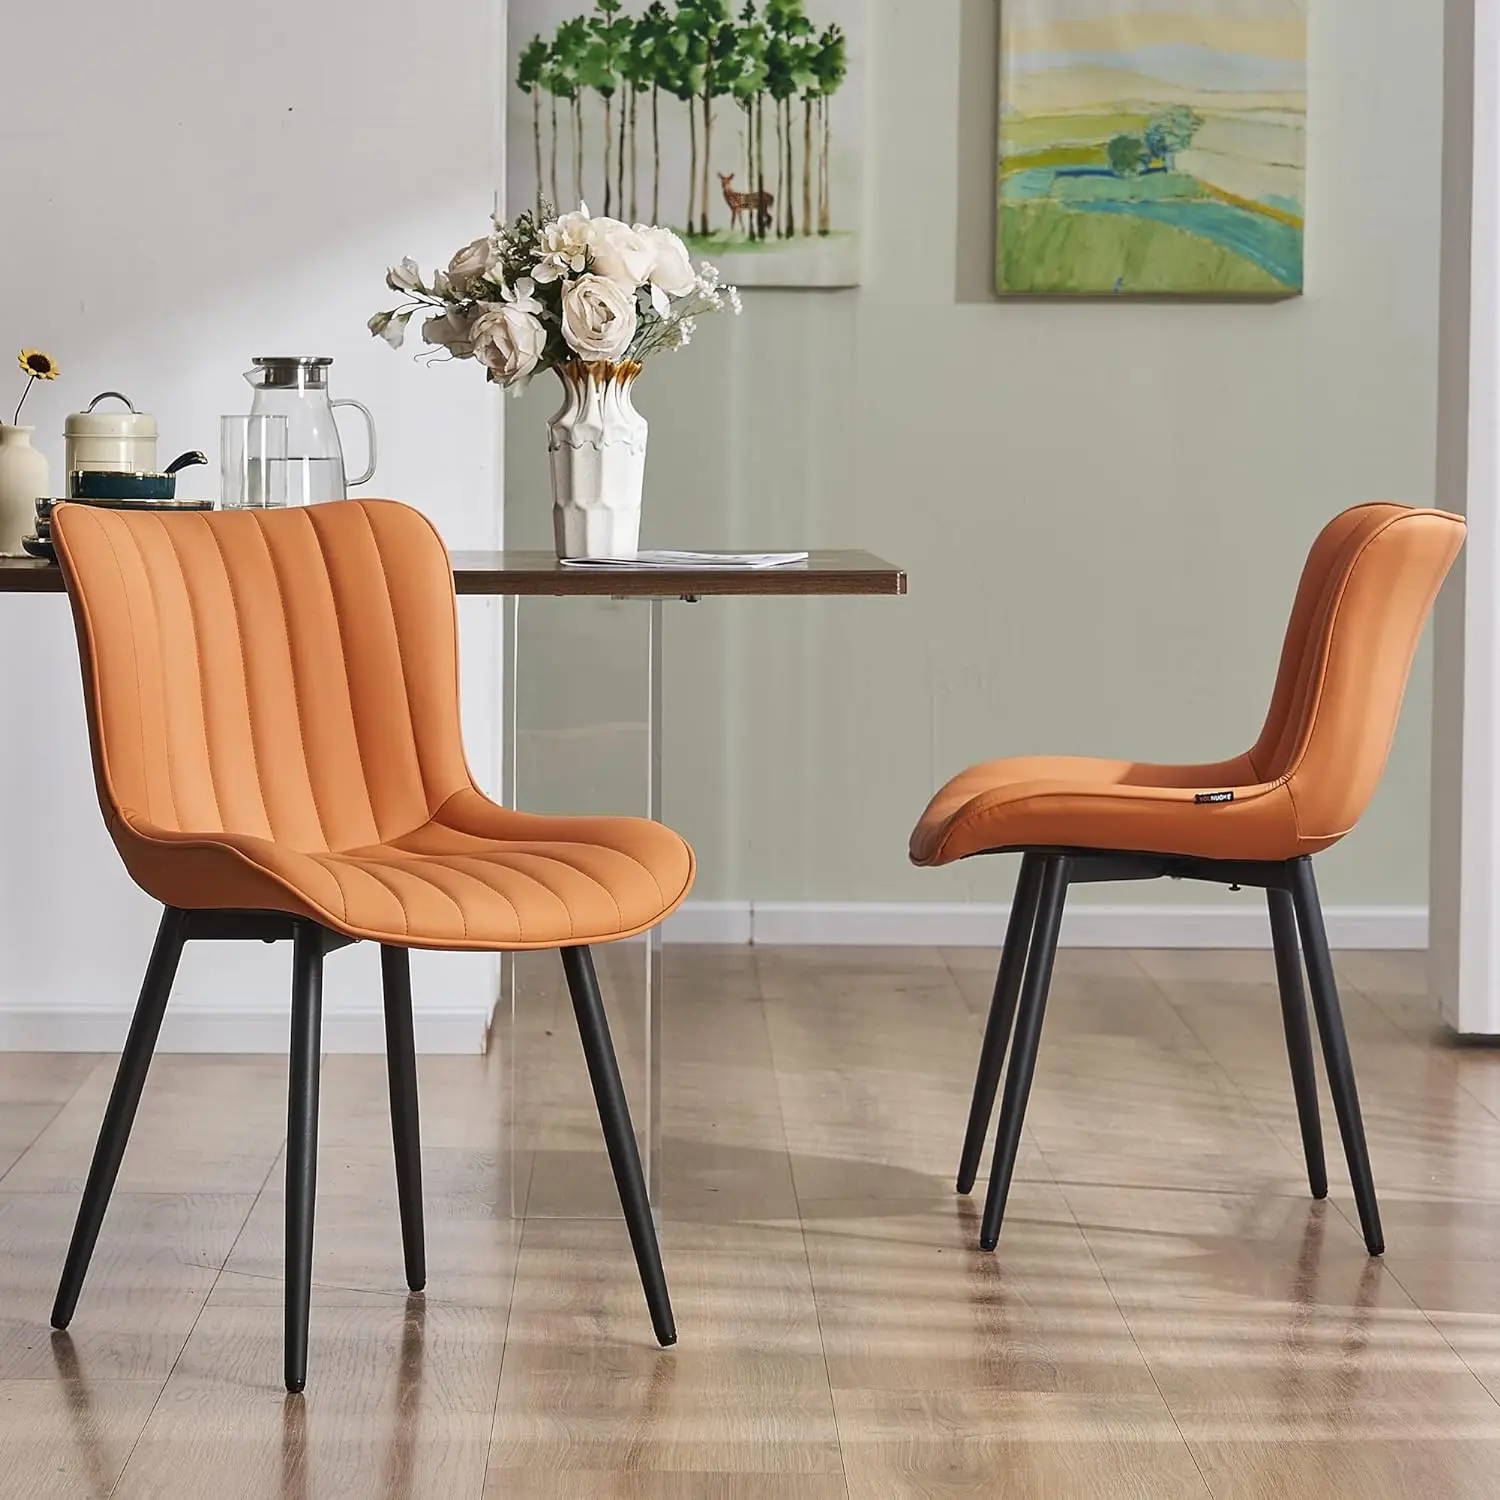 

YOUNUOKE Camel Dining Chairs Set of 2 Upholstered Mid Century Kitchen Chairs Armless Faux Leather Modern Side Chair